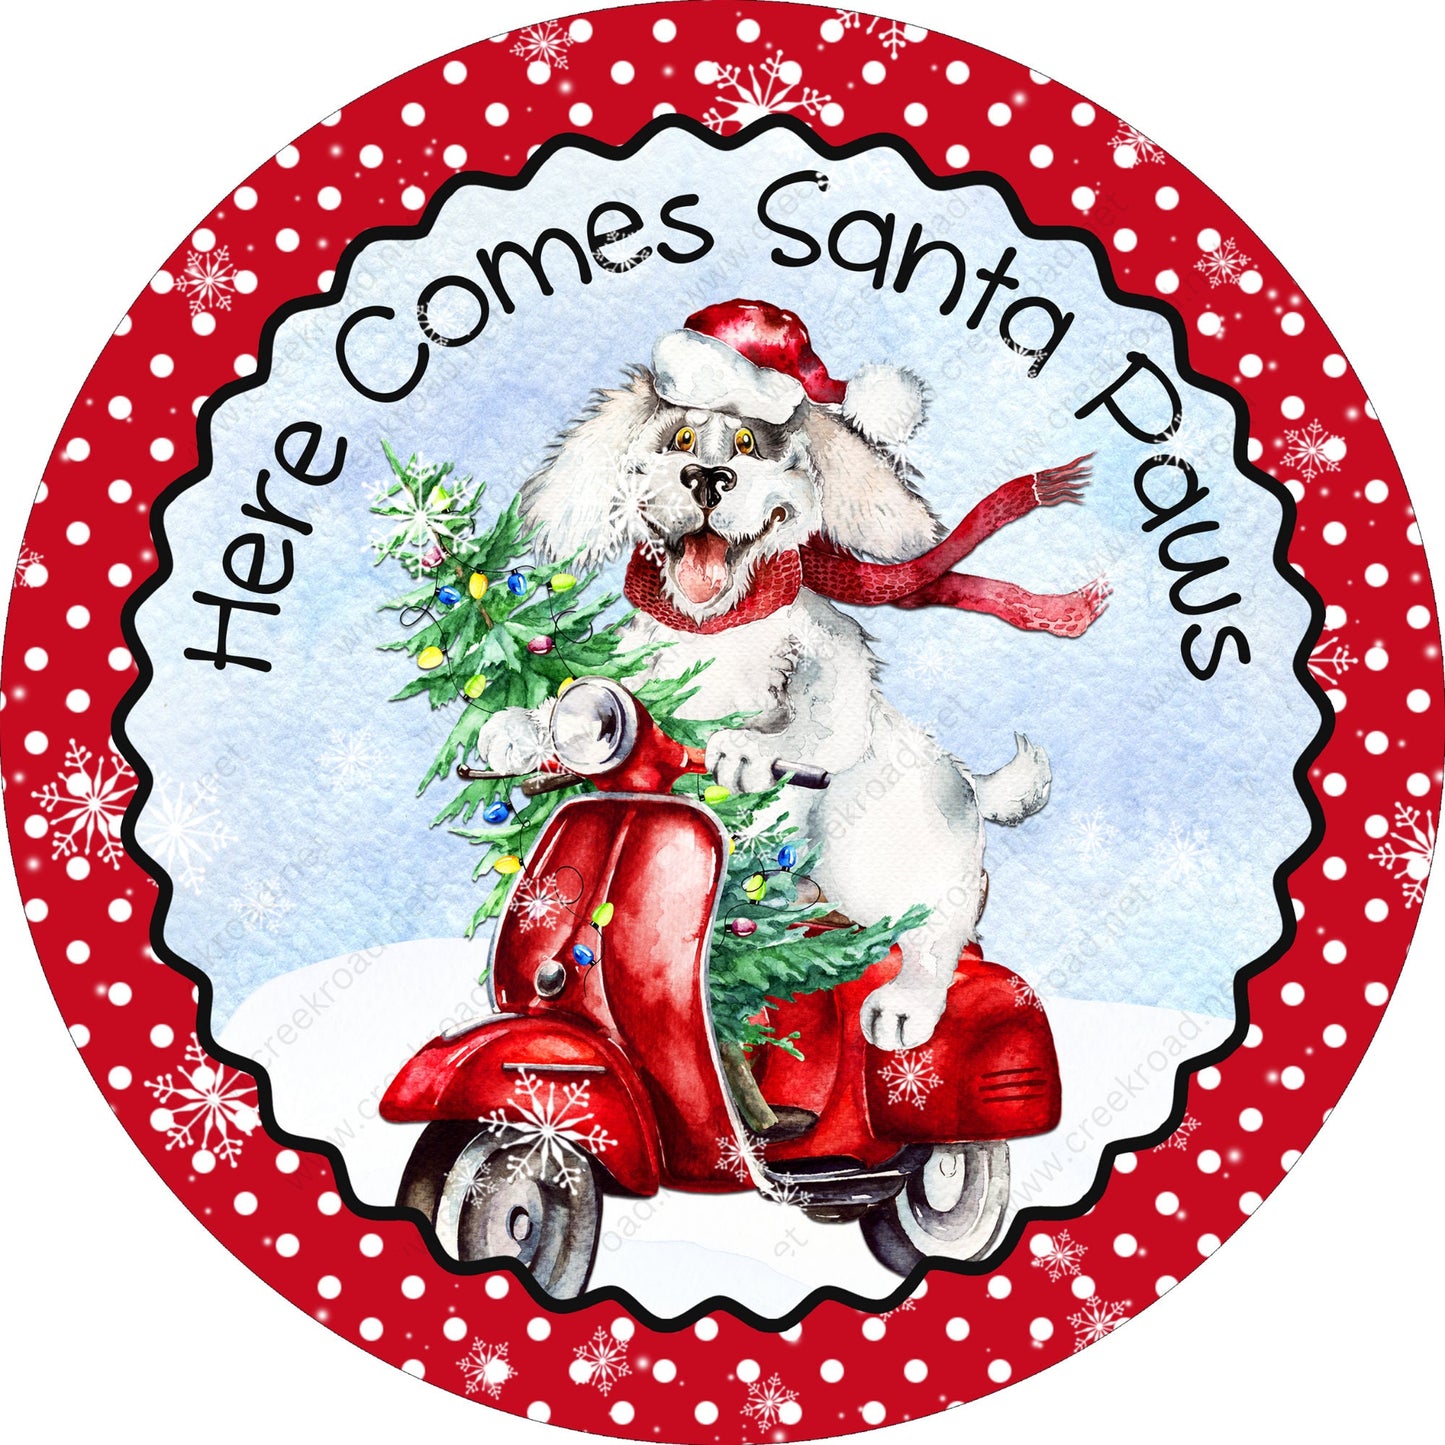 Here Comes Santa Paws Dog on Scooter Wreath Sign-Sublimation-Round-Christmas-Winter-Decor